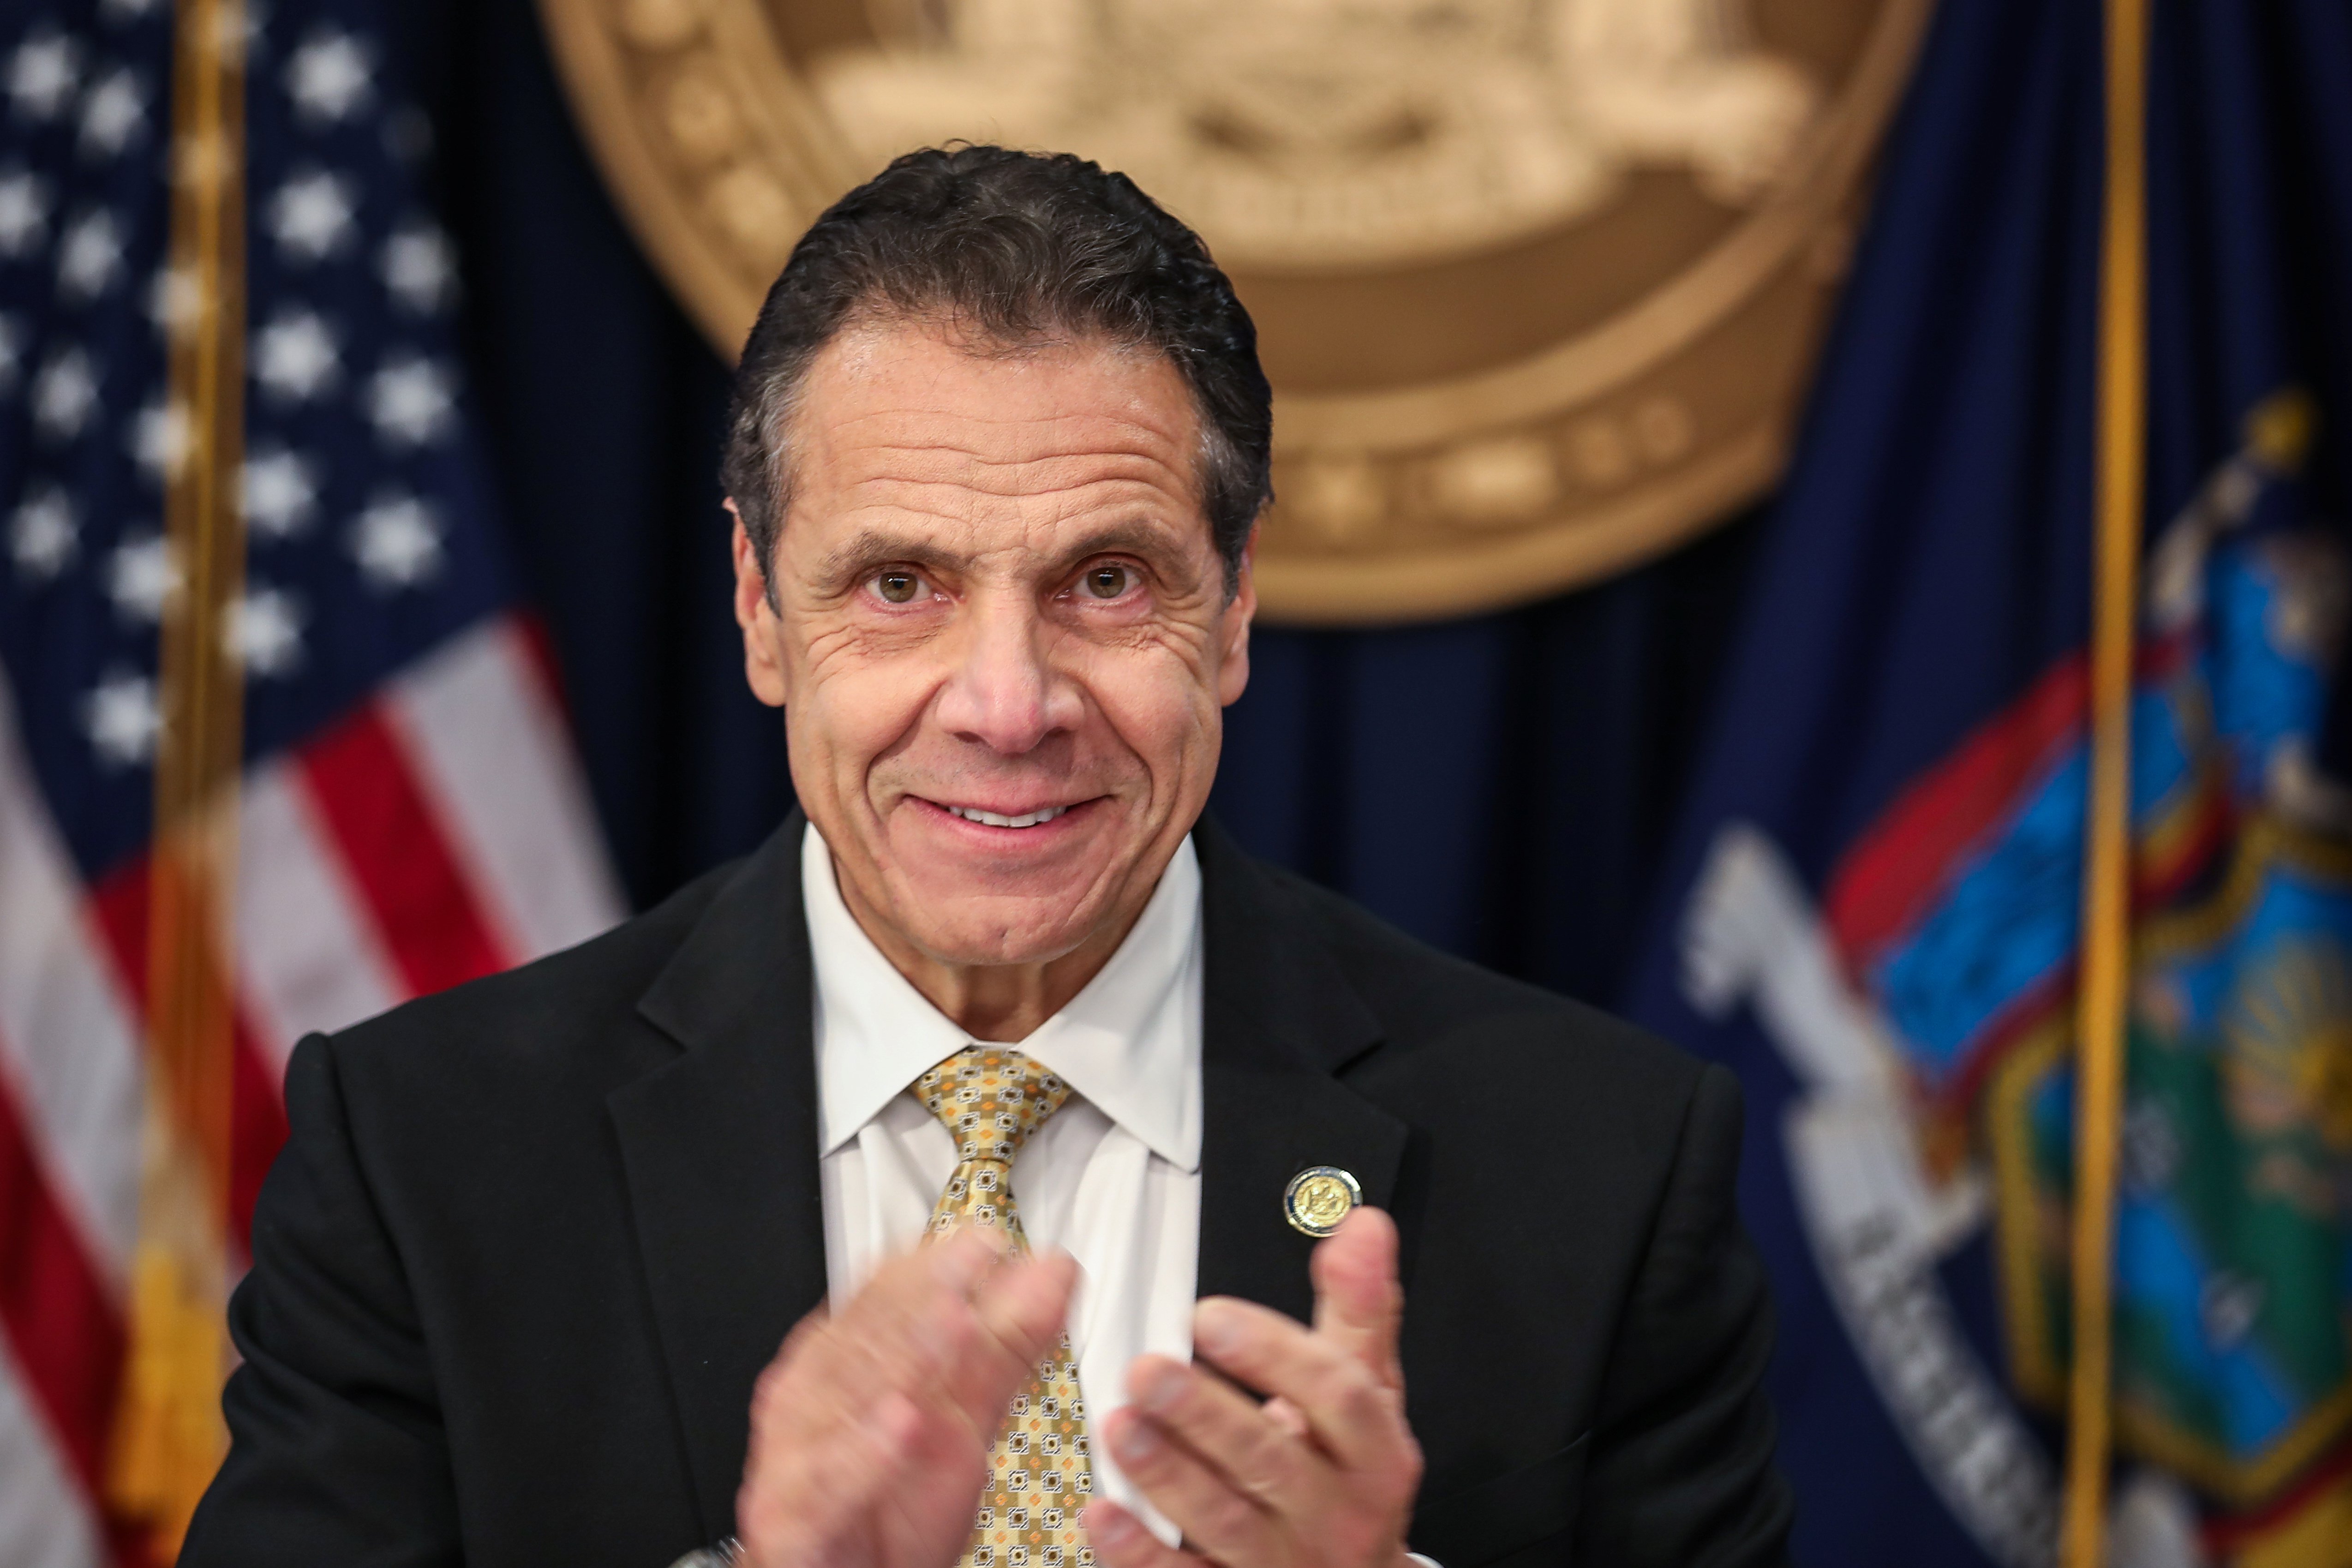 New York Governor Andrew Cuomo speaks during a news conference about Amazon's headquarters expansion to Long Island City in the Queens borough of New York City